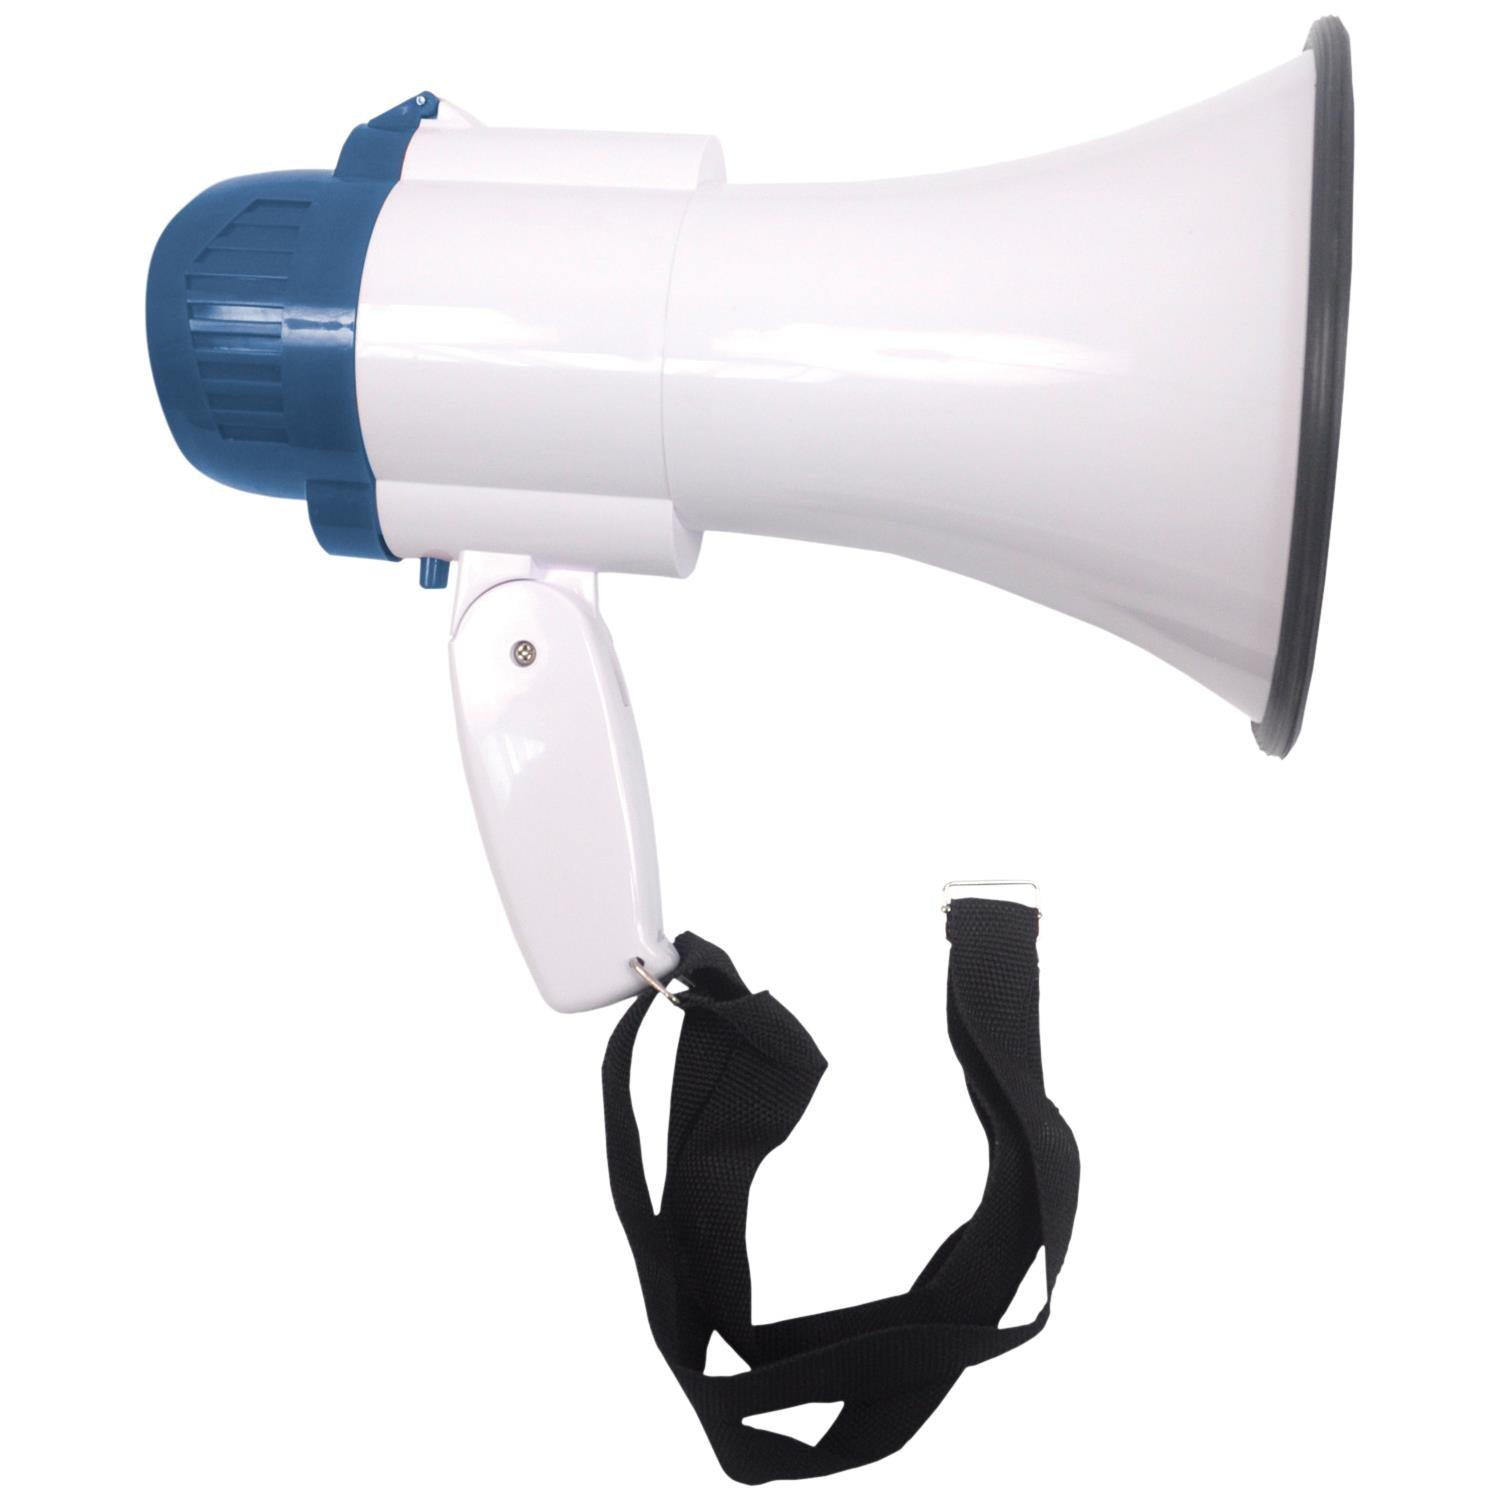 Eagle 15W Handheld Megaphone with Foldable Hand Grip - DY Pro Audio